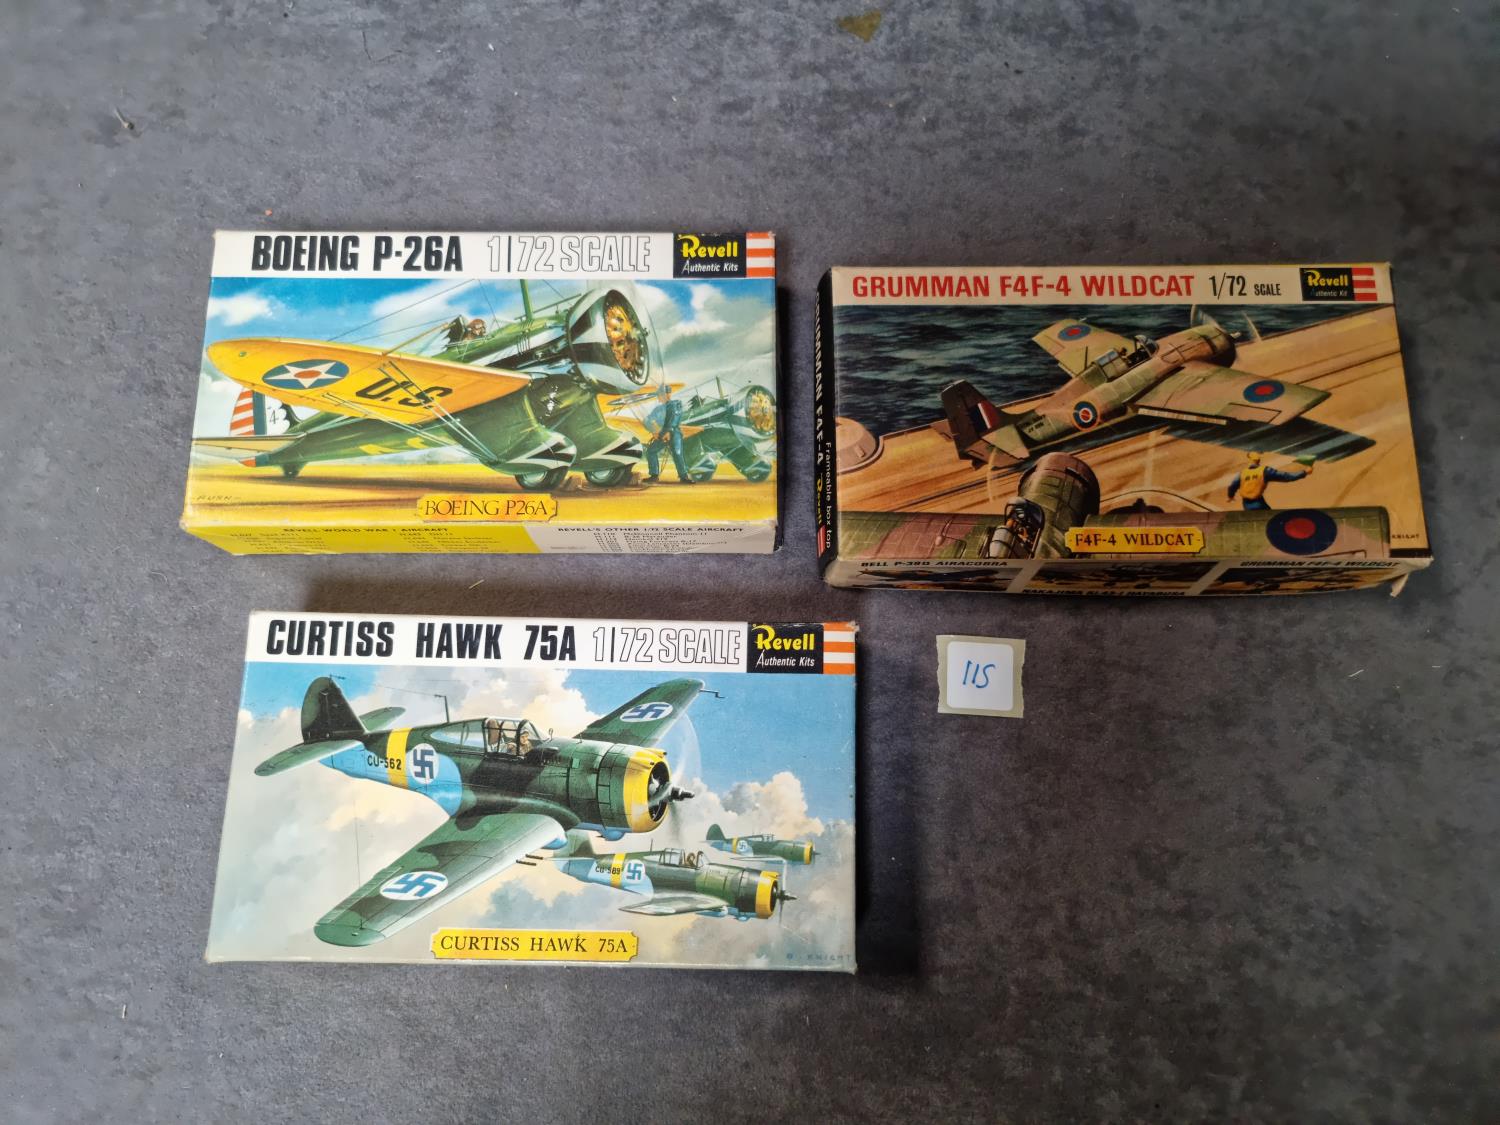 3x Revell 1/72 Scale Boxed Model Kits Loose With Instructions Comprising Of #H-656 Boeing P-26A "